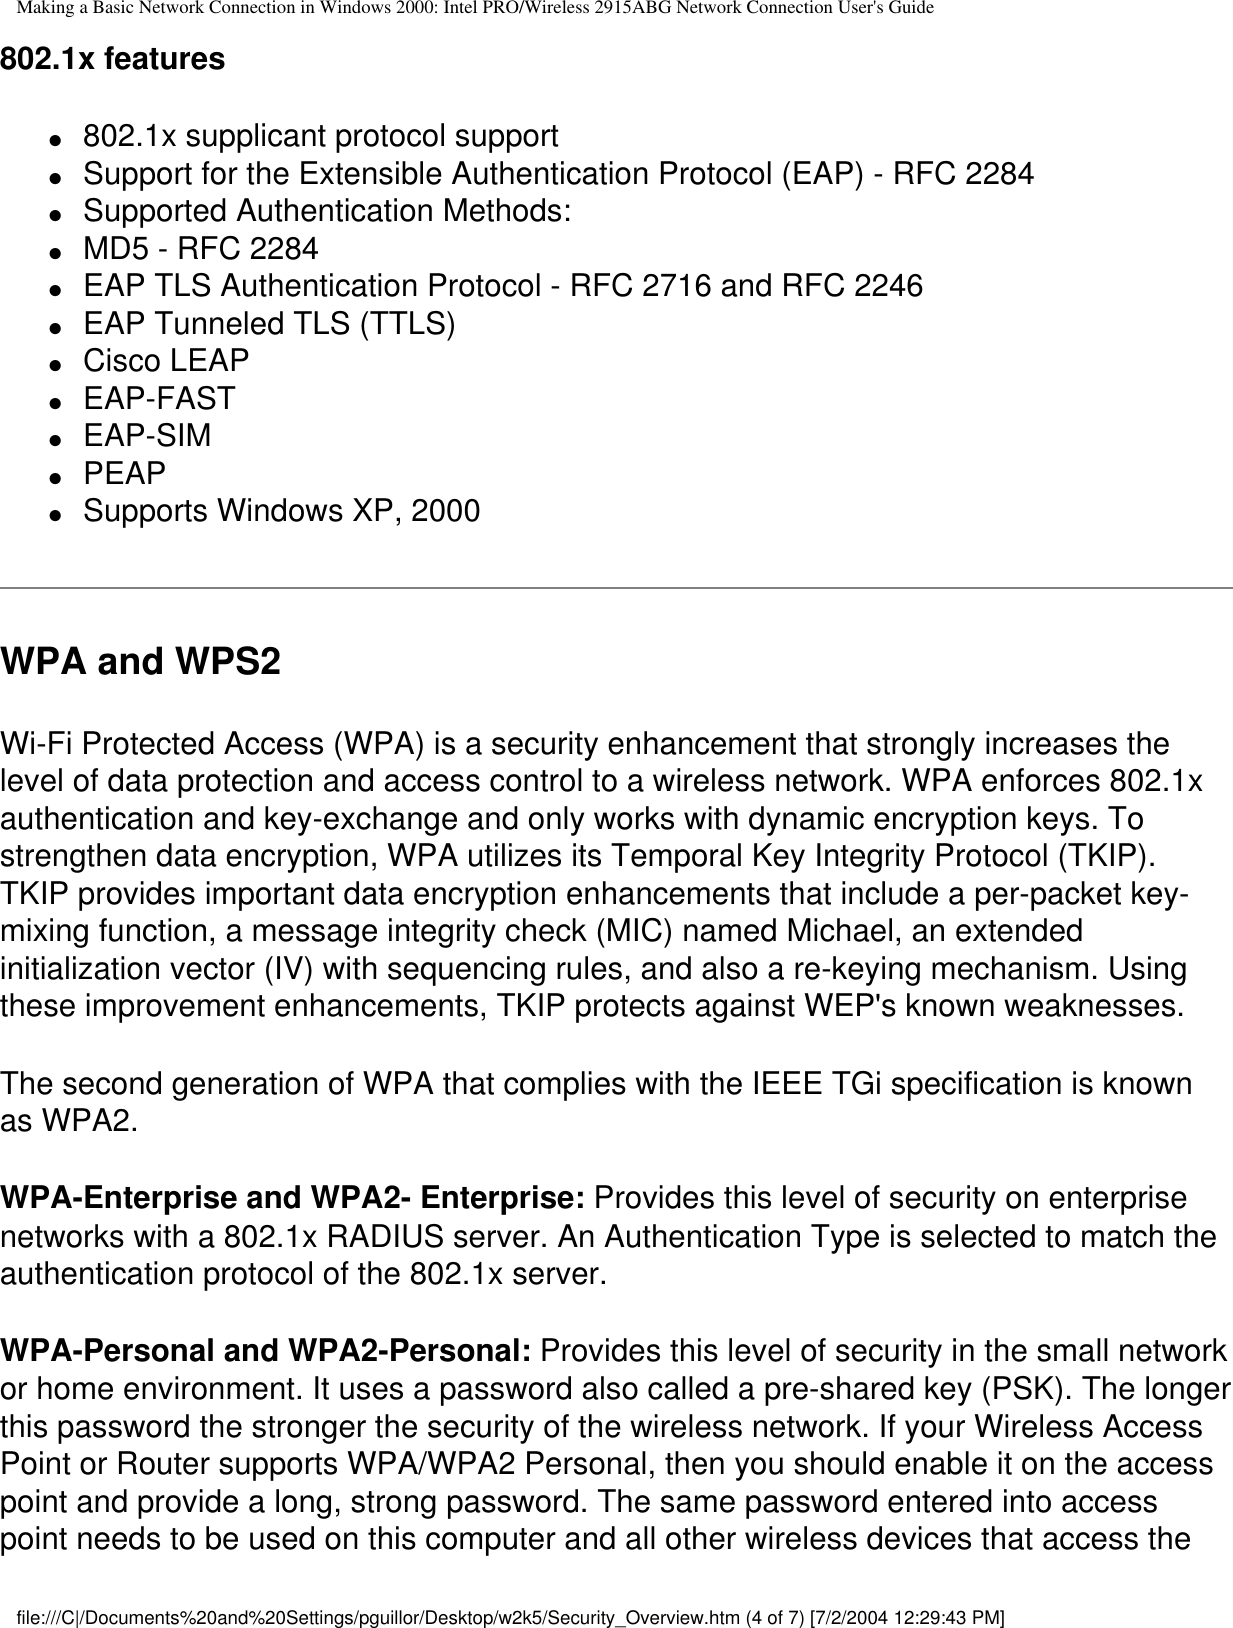 Making a Basic Network Connection in Windows 2000: Intel PRO/Wireless 2915ABG Network Connection User&apos;s Guide802.1x features●     802.1x supplicant protocol support ●     Support for the Extensible Authentication Protocol (EAP) - RFC 2284 ●     Supported Authentication Methods: ●     MD5 - RFC 2284 ●     EAP TLS Authentication Protocol - RFC 2716 and RFC 2246 ●     EAP Tunneled TLS (TTLS)●     Cisco LEAP●     EAP-FAST●     EAP-SIM●     PEAP●     Supports Windows XP, 2000WPA and WPS2Wi-Fi Protected Access (WPA) is a security enhancement that strongly increases the level of data protection and access control to a wireless network. WPA enforces 802.1x authentication and key-exchange and only works with dynamic encryption keys. To strengthen data encryption, WPA utilizes its Temporal Key Integrity Protocol (TKIP). TKIP provides important data encryption enhancements that include a per-packet key-mixing function, a message integrity check (MIC) named Michael, an extended initialization vector (IV) with sequencing rules, and also a re-keying mechanism. Using these improvement enhancements, TKIP protects against WEP&apos;s known weaknesses. The second generation of WPA that complies with the IEEE TGi specification is known as WPA2.WPA-Enterprise and WPA2- Enterprise: Provides this level of security on enterprise networks with a 802.1x RADIUS server. An Authentication Type is selected to match the authentication protocol of the 802.1x server.WPA-Personal and WPA2-Personal: Provides this level of security in the small network or home environment. It uses a password also called a pre-shared key (PSK). The longer this password the stronger the security of the wireless network. If your Wireless Access Point or Router supports WPA/WPA2 Personal, then you should enable it on the access point and provide a long, strong password. The same password entered into access point needs to be used on this computer and all other wireless devices that access the file:///C|/Documents%20and%20Settings/pguillor/Desktop/w2k5/Security_Overview.htm (4 of 7) [7/2/2004 12:29:43 PM]